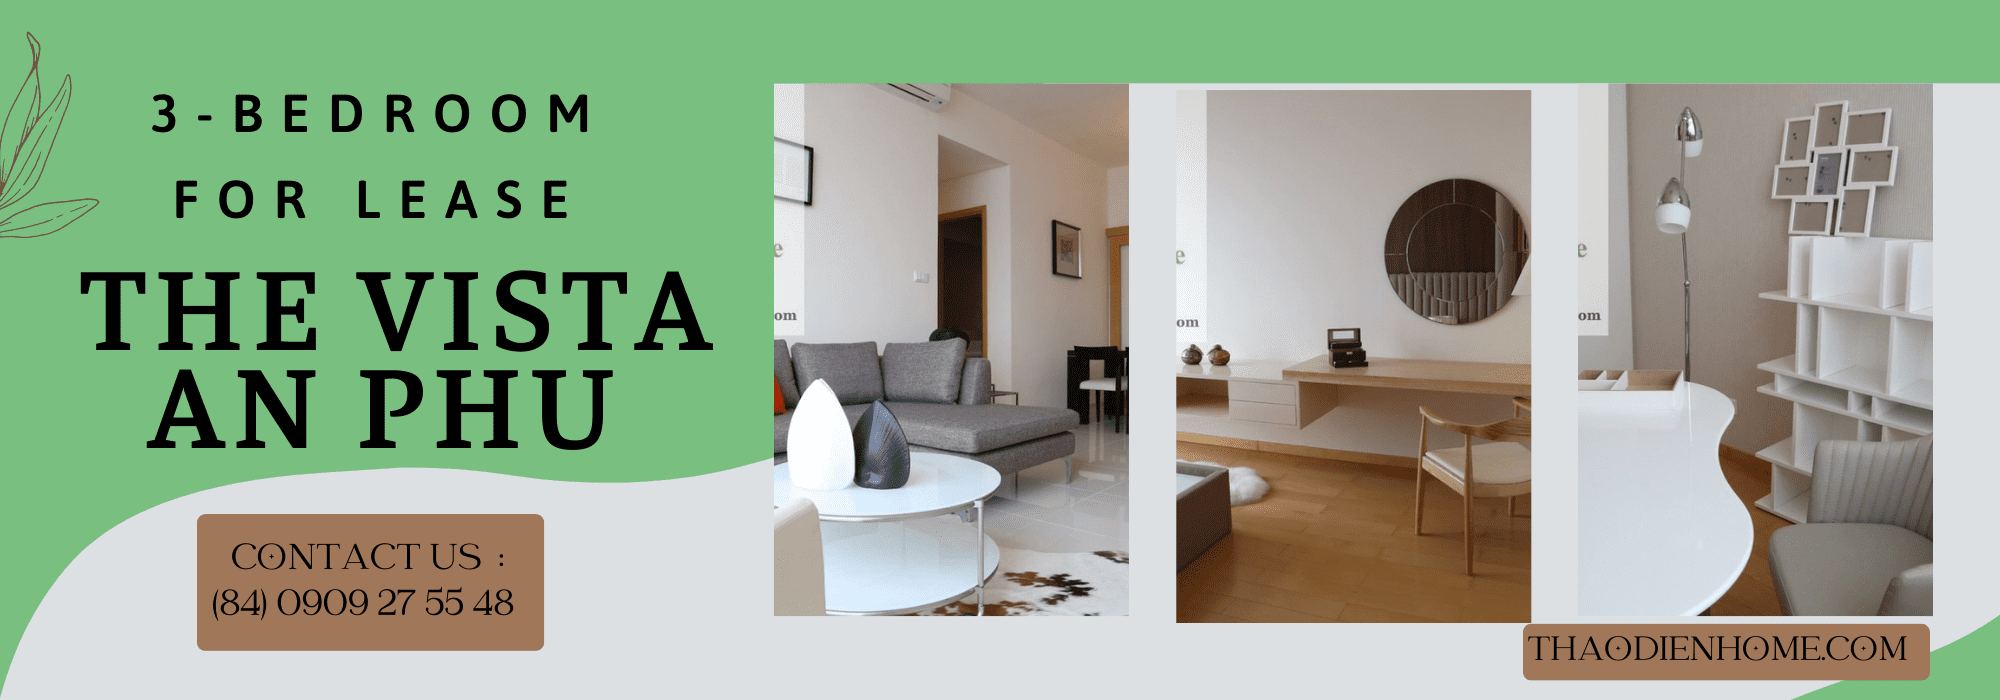 Substantial And Adorable 3 Bedroom Apartment In The Vista An Phu